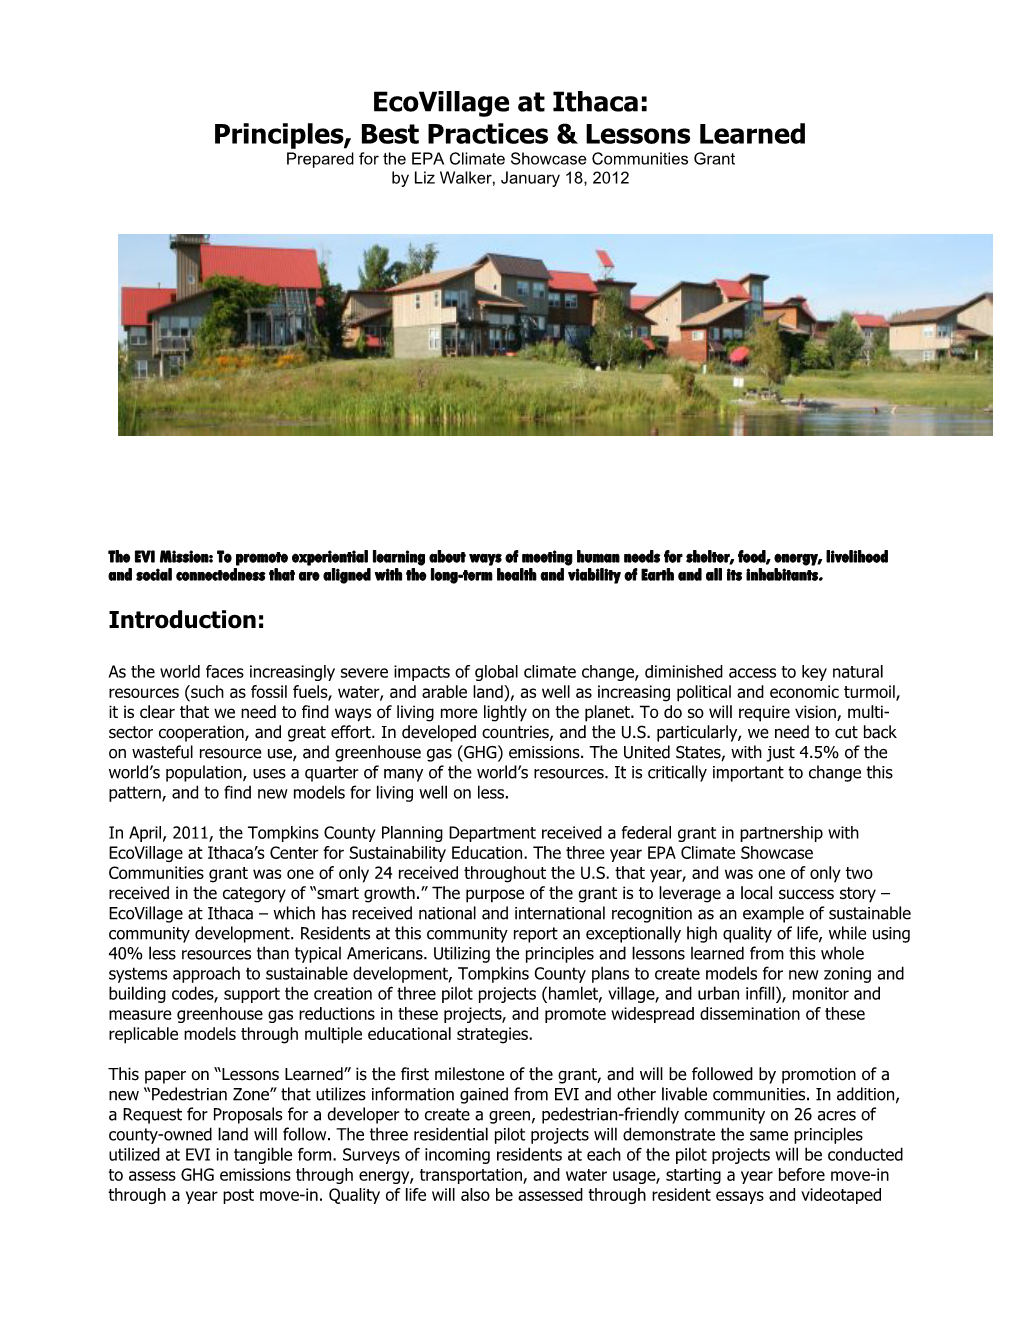 Ecovillage at Ithaca: Principles, Best Practices & Lessons Learned